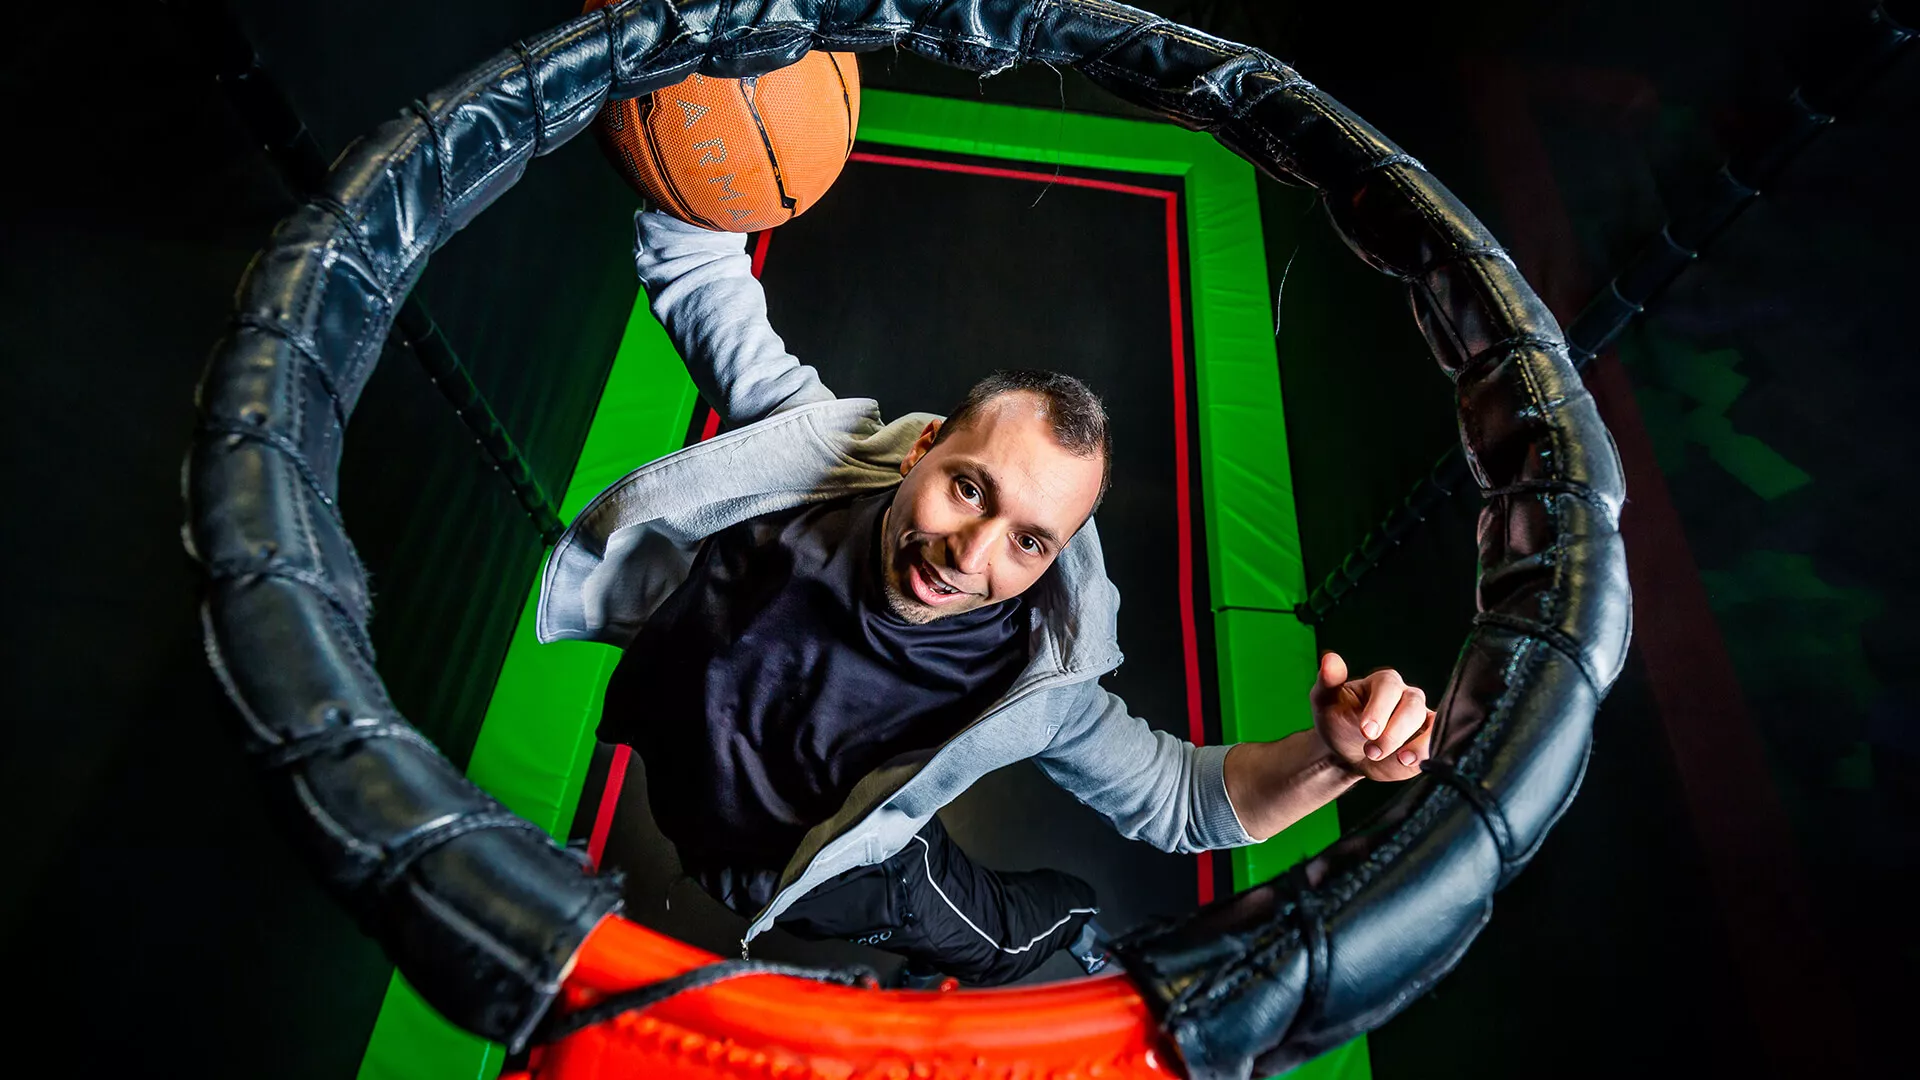  Trampoline Parks Attractions - Slam Dunk